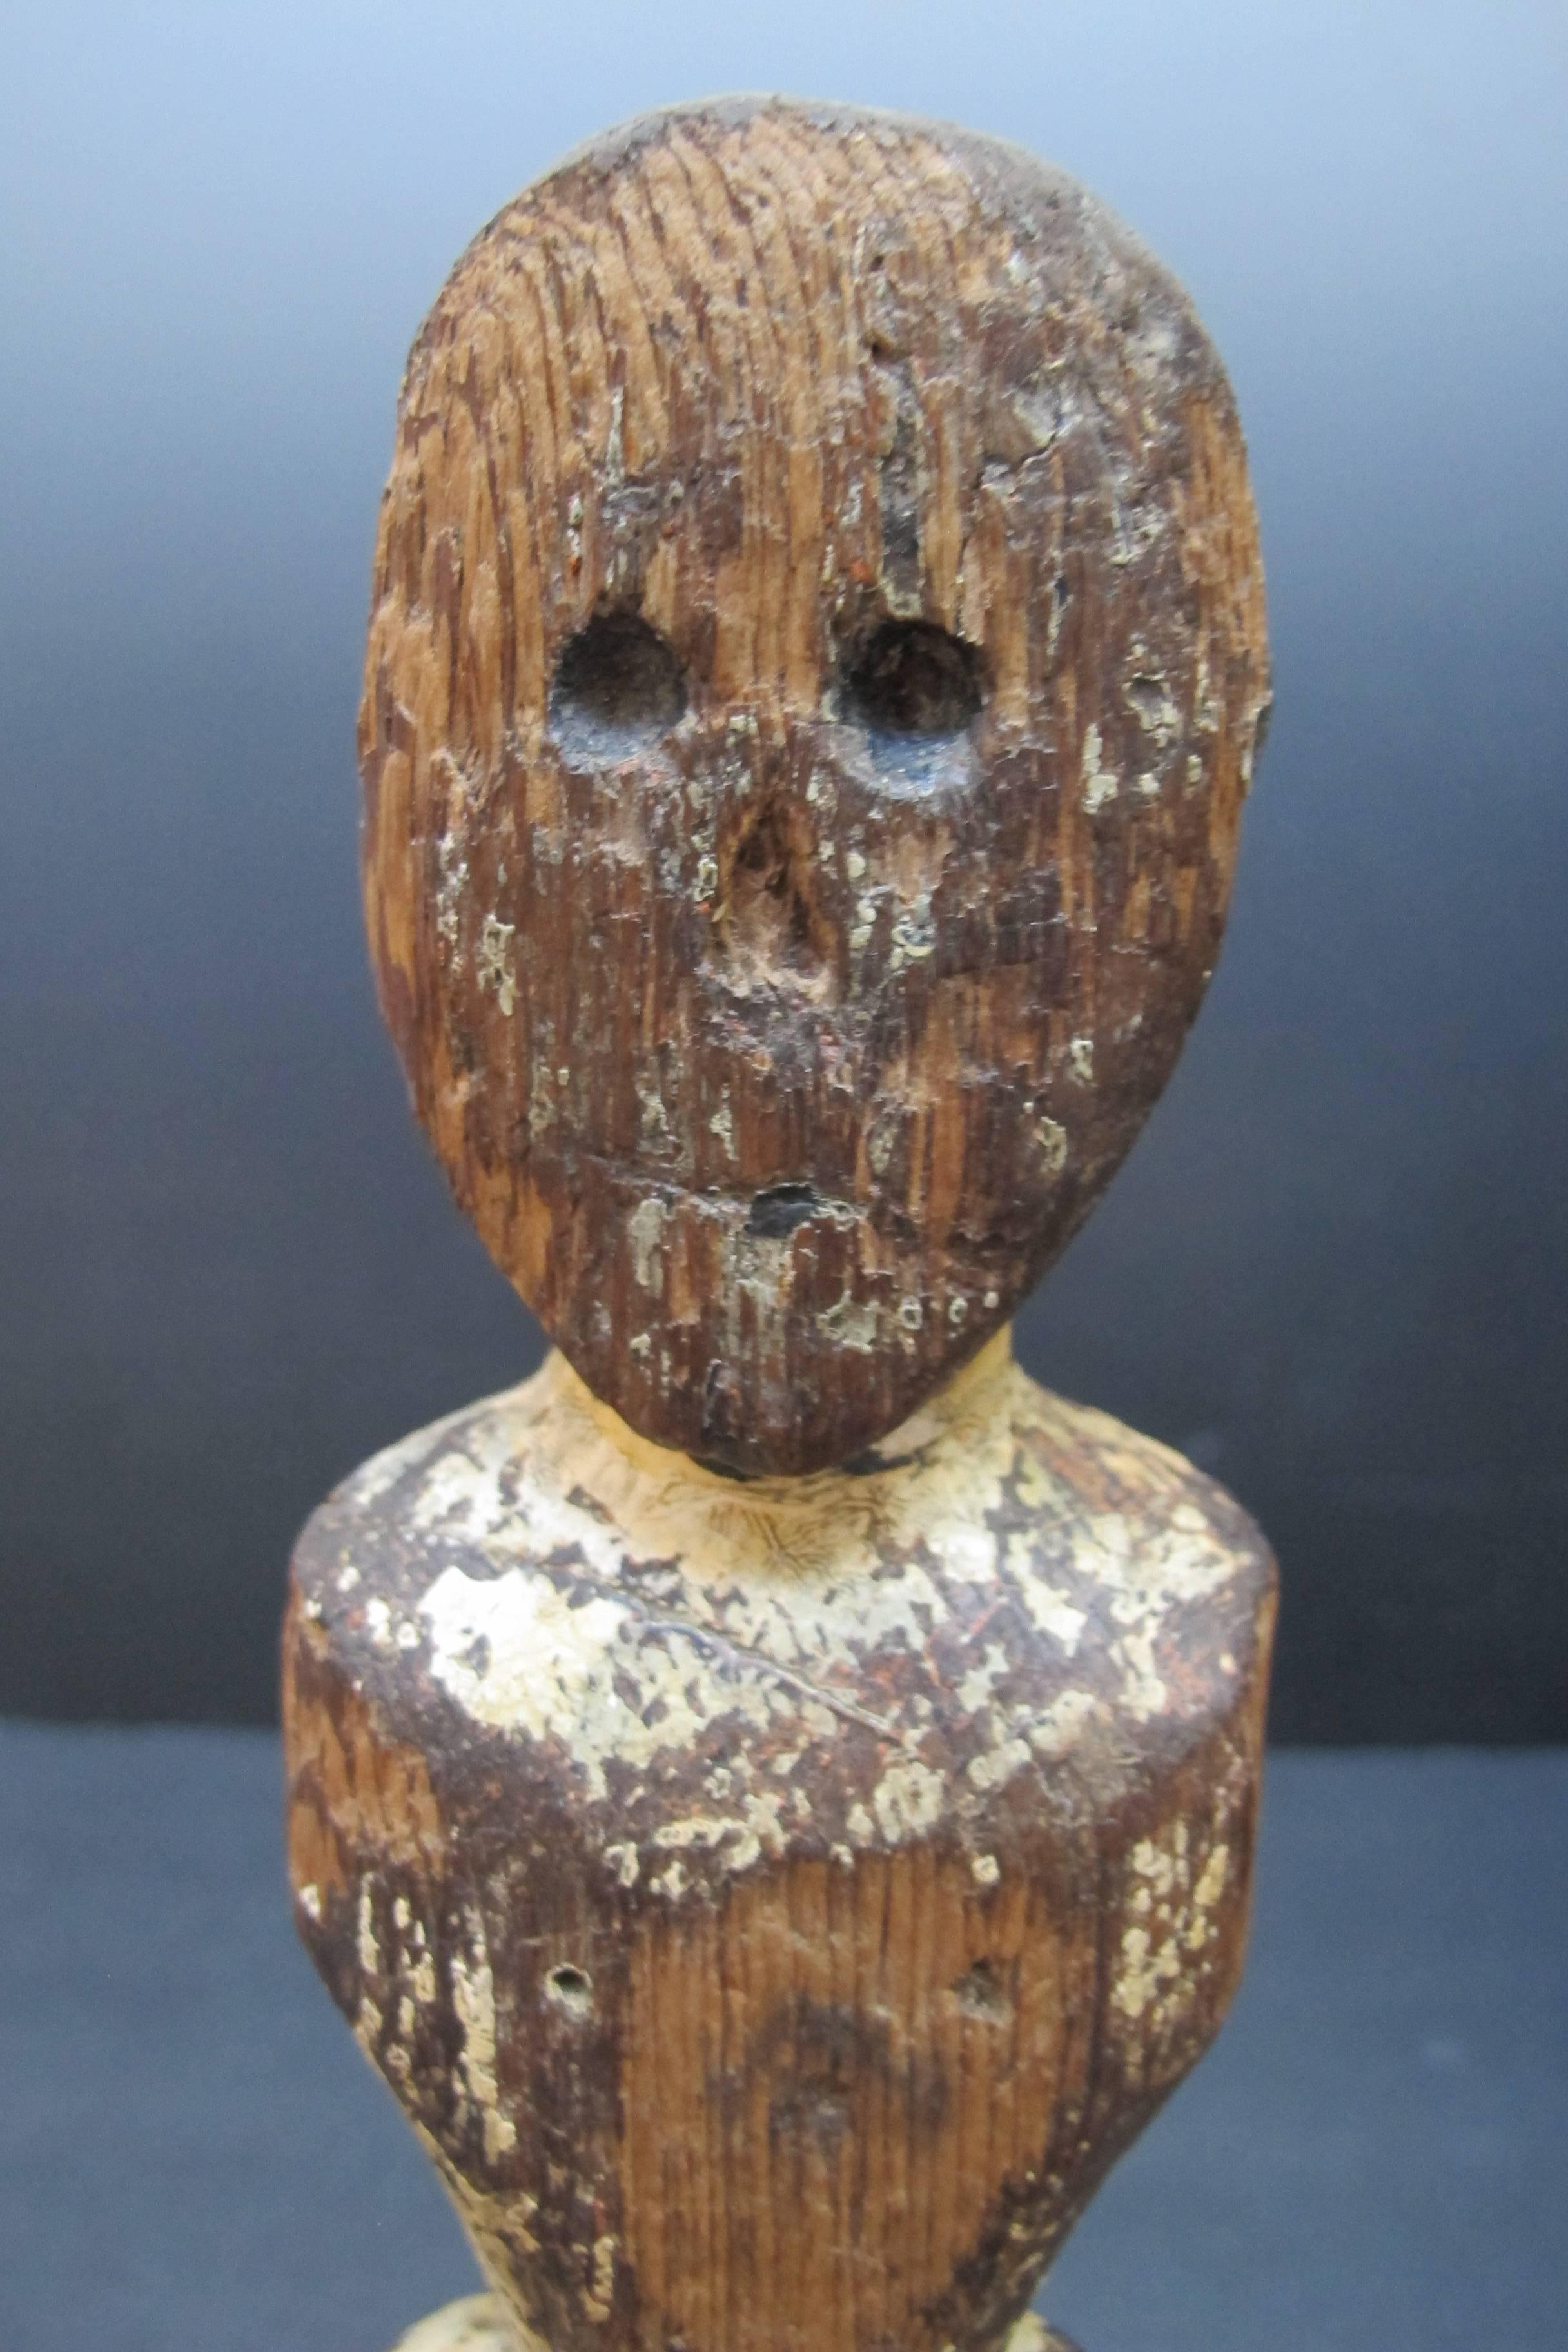 An early Pioneer doll of minimal form and remains of old paint. The head has hollowed out eyes which may have had inset eyes at one time. The wood is white cedar. The form is related to the wooden Queen Anne dolls of the 18th century and may have